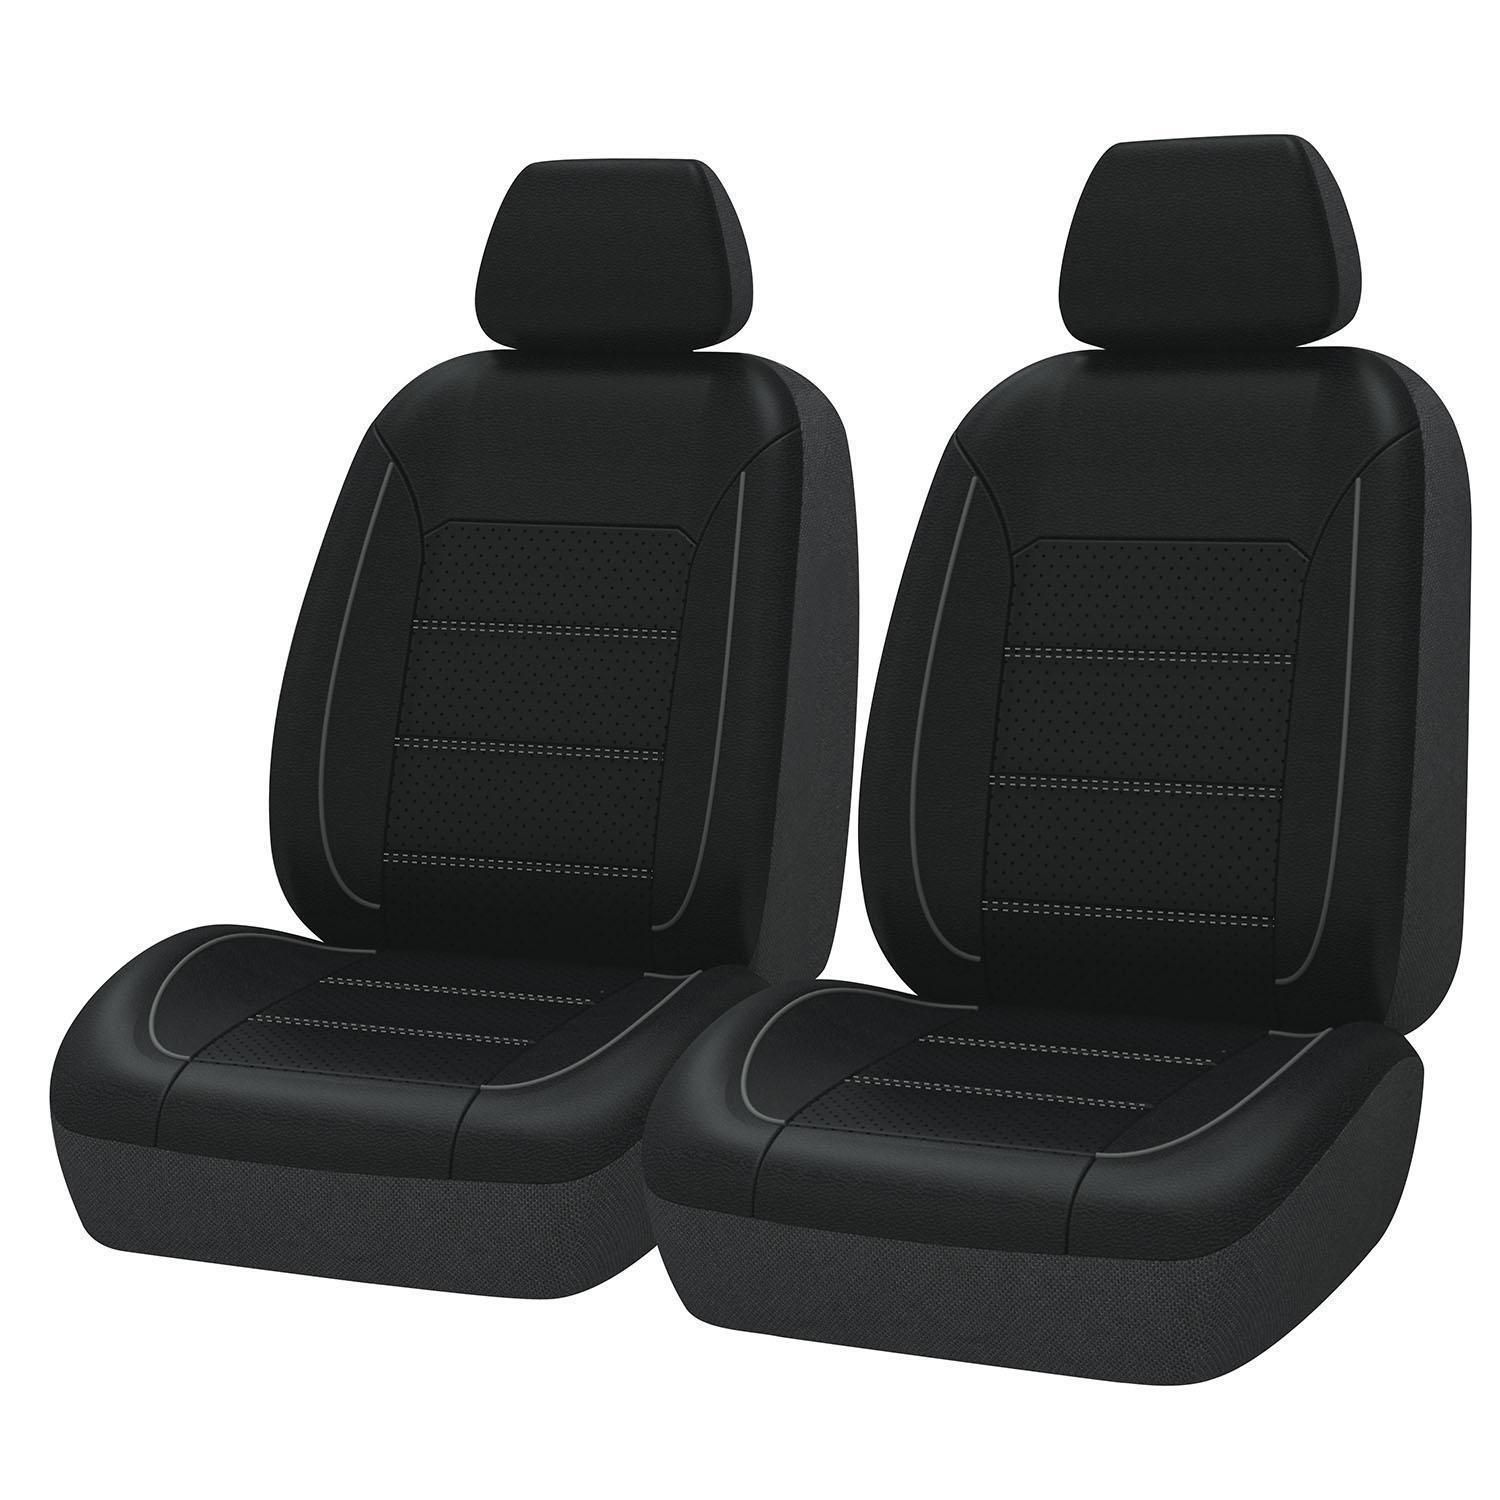 Autocraft Seat Cover - Black, 1 each, sold by each - image 1 of 4